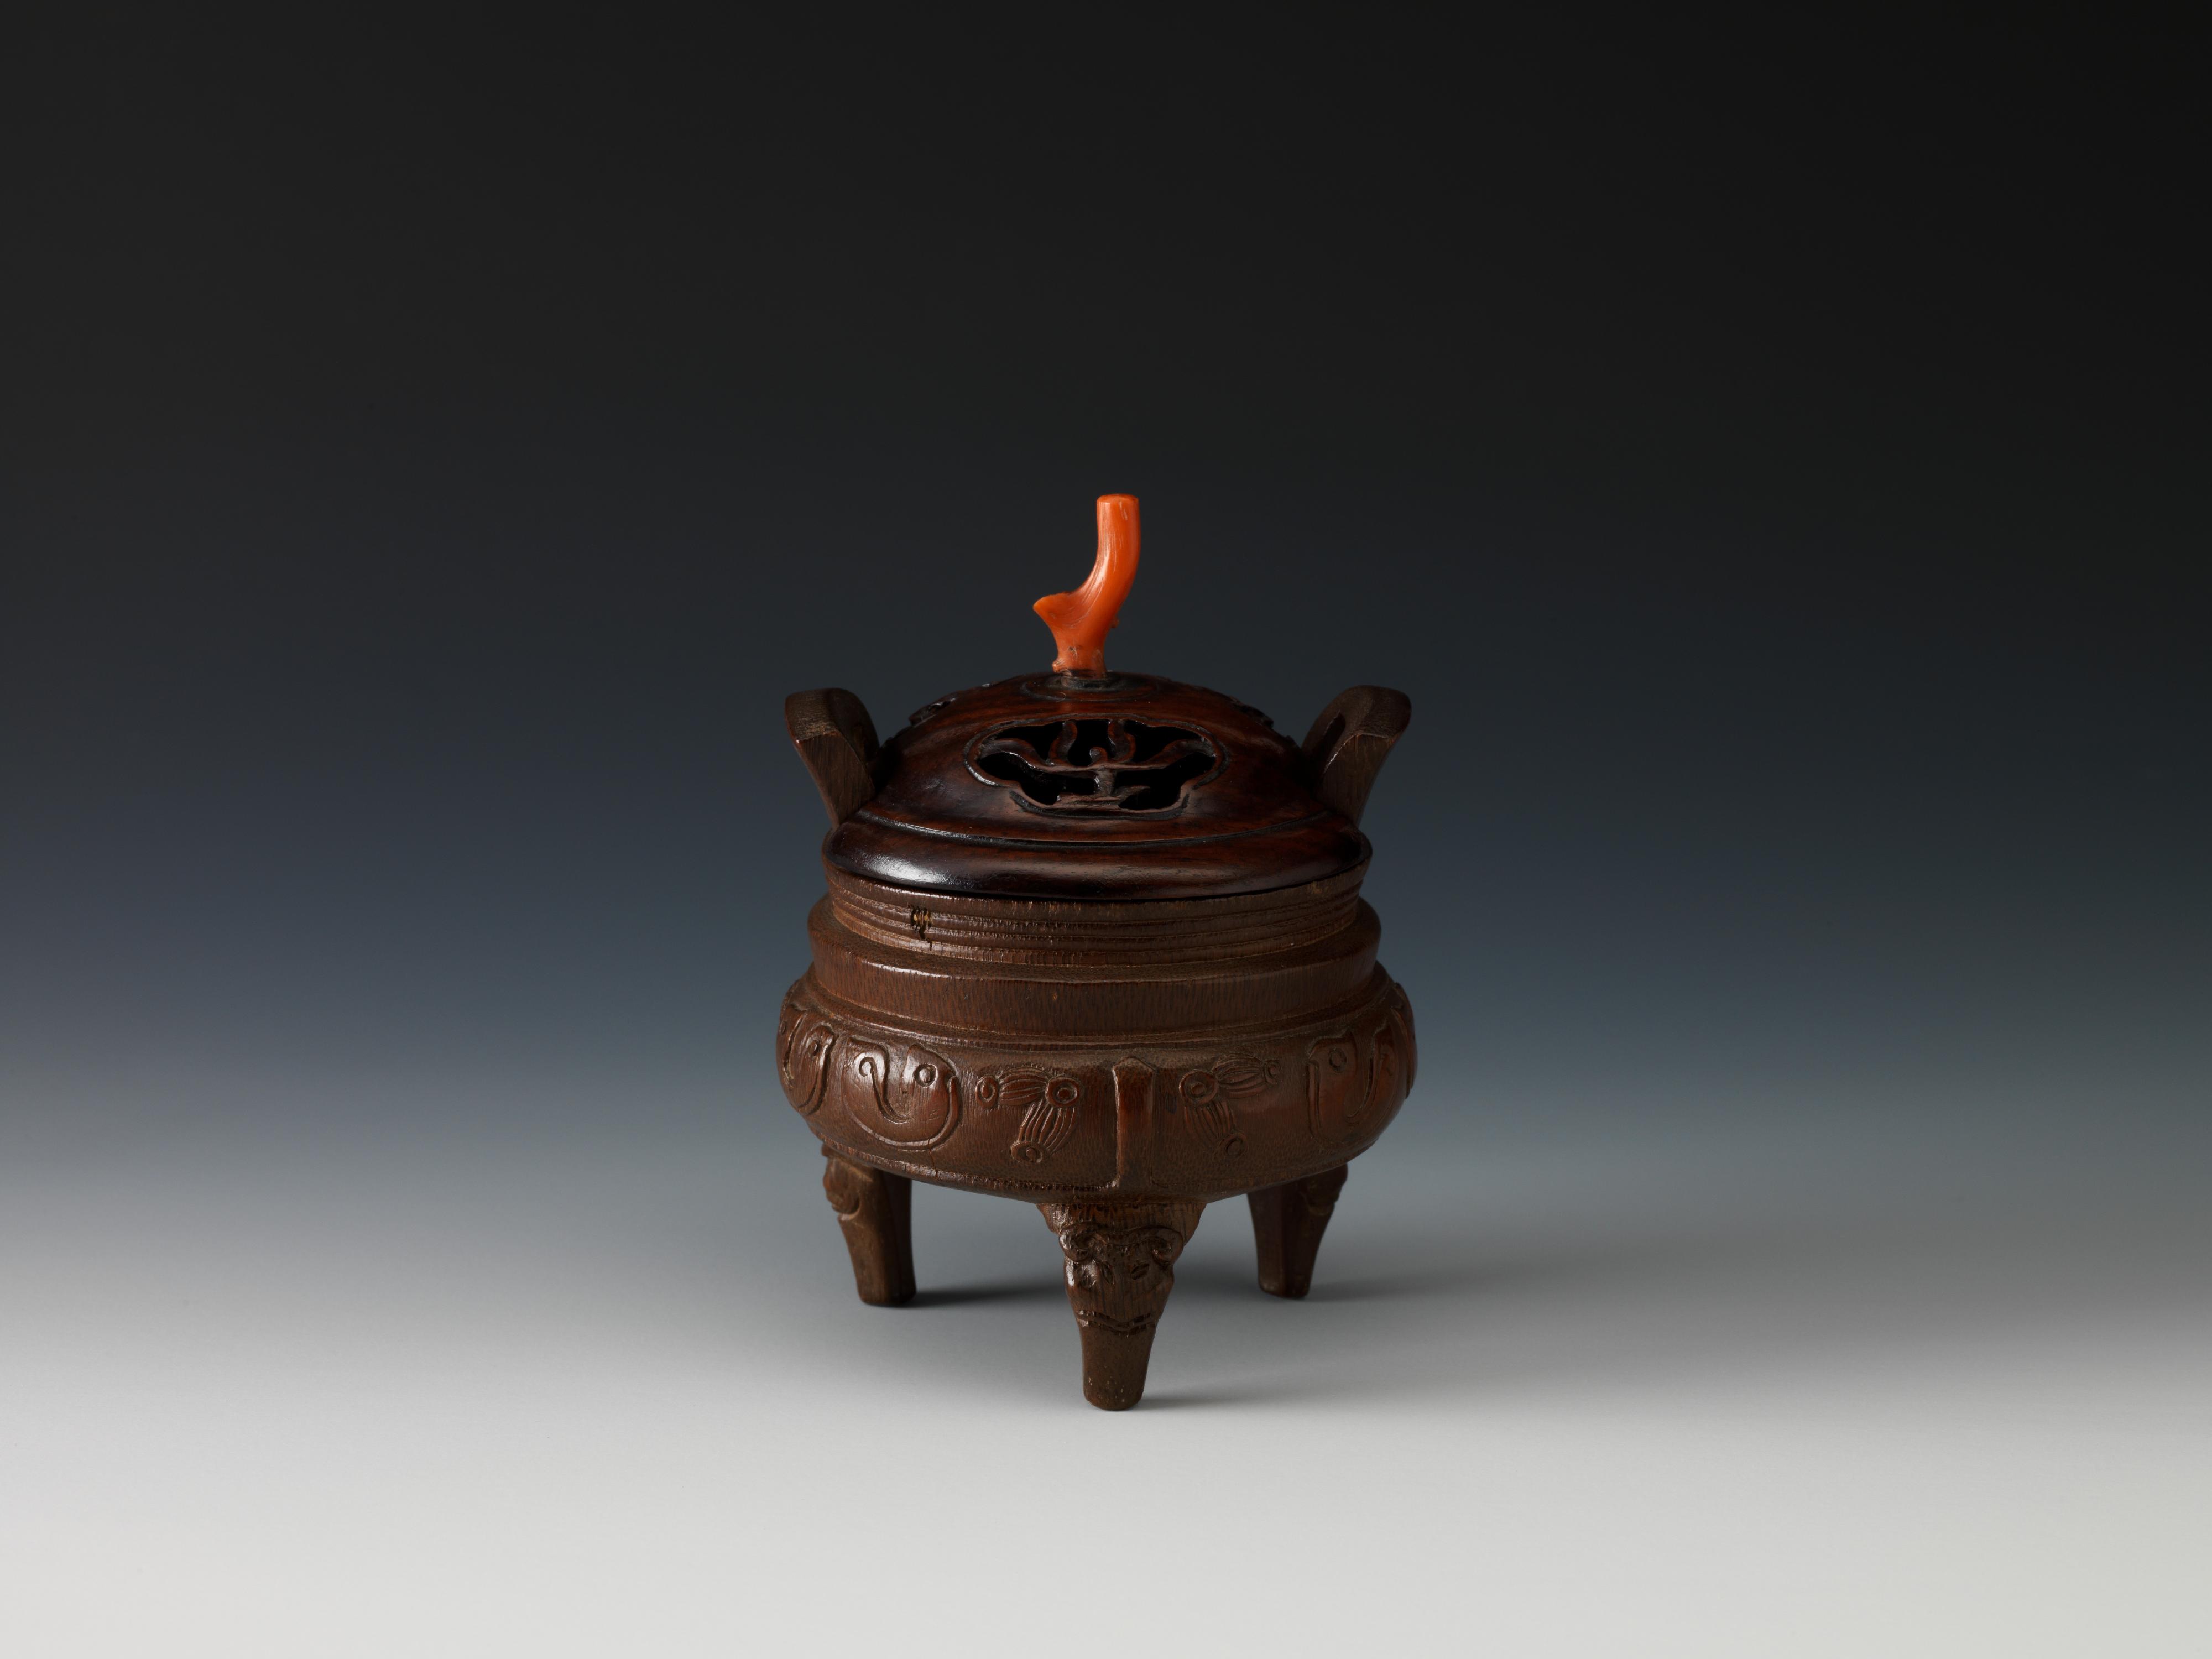 The Flagstaff House Museum of Tea Ware today (August 2) stages the exhibition "The Art of Living: Stationery and Tea Accessories of the Chinese Literati". Picture shows an incense-burner carved in the round made of bamboo from the Qing dynasty.
